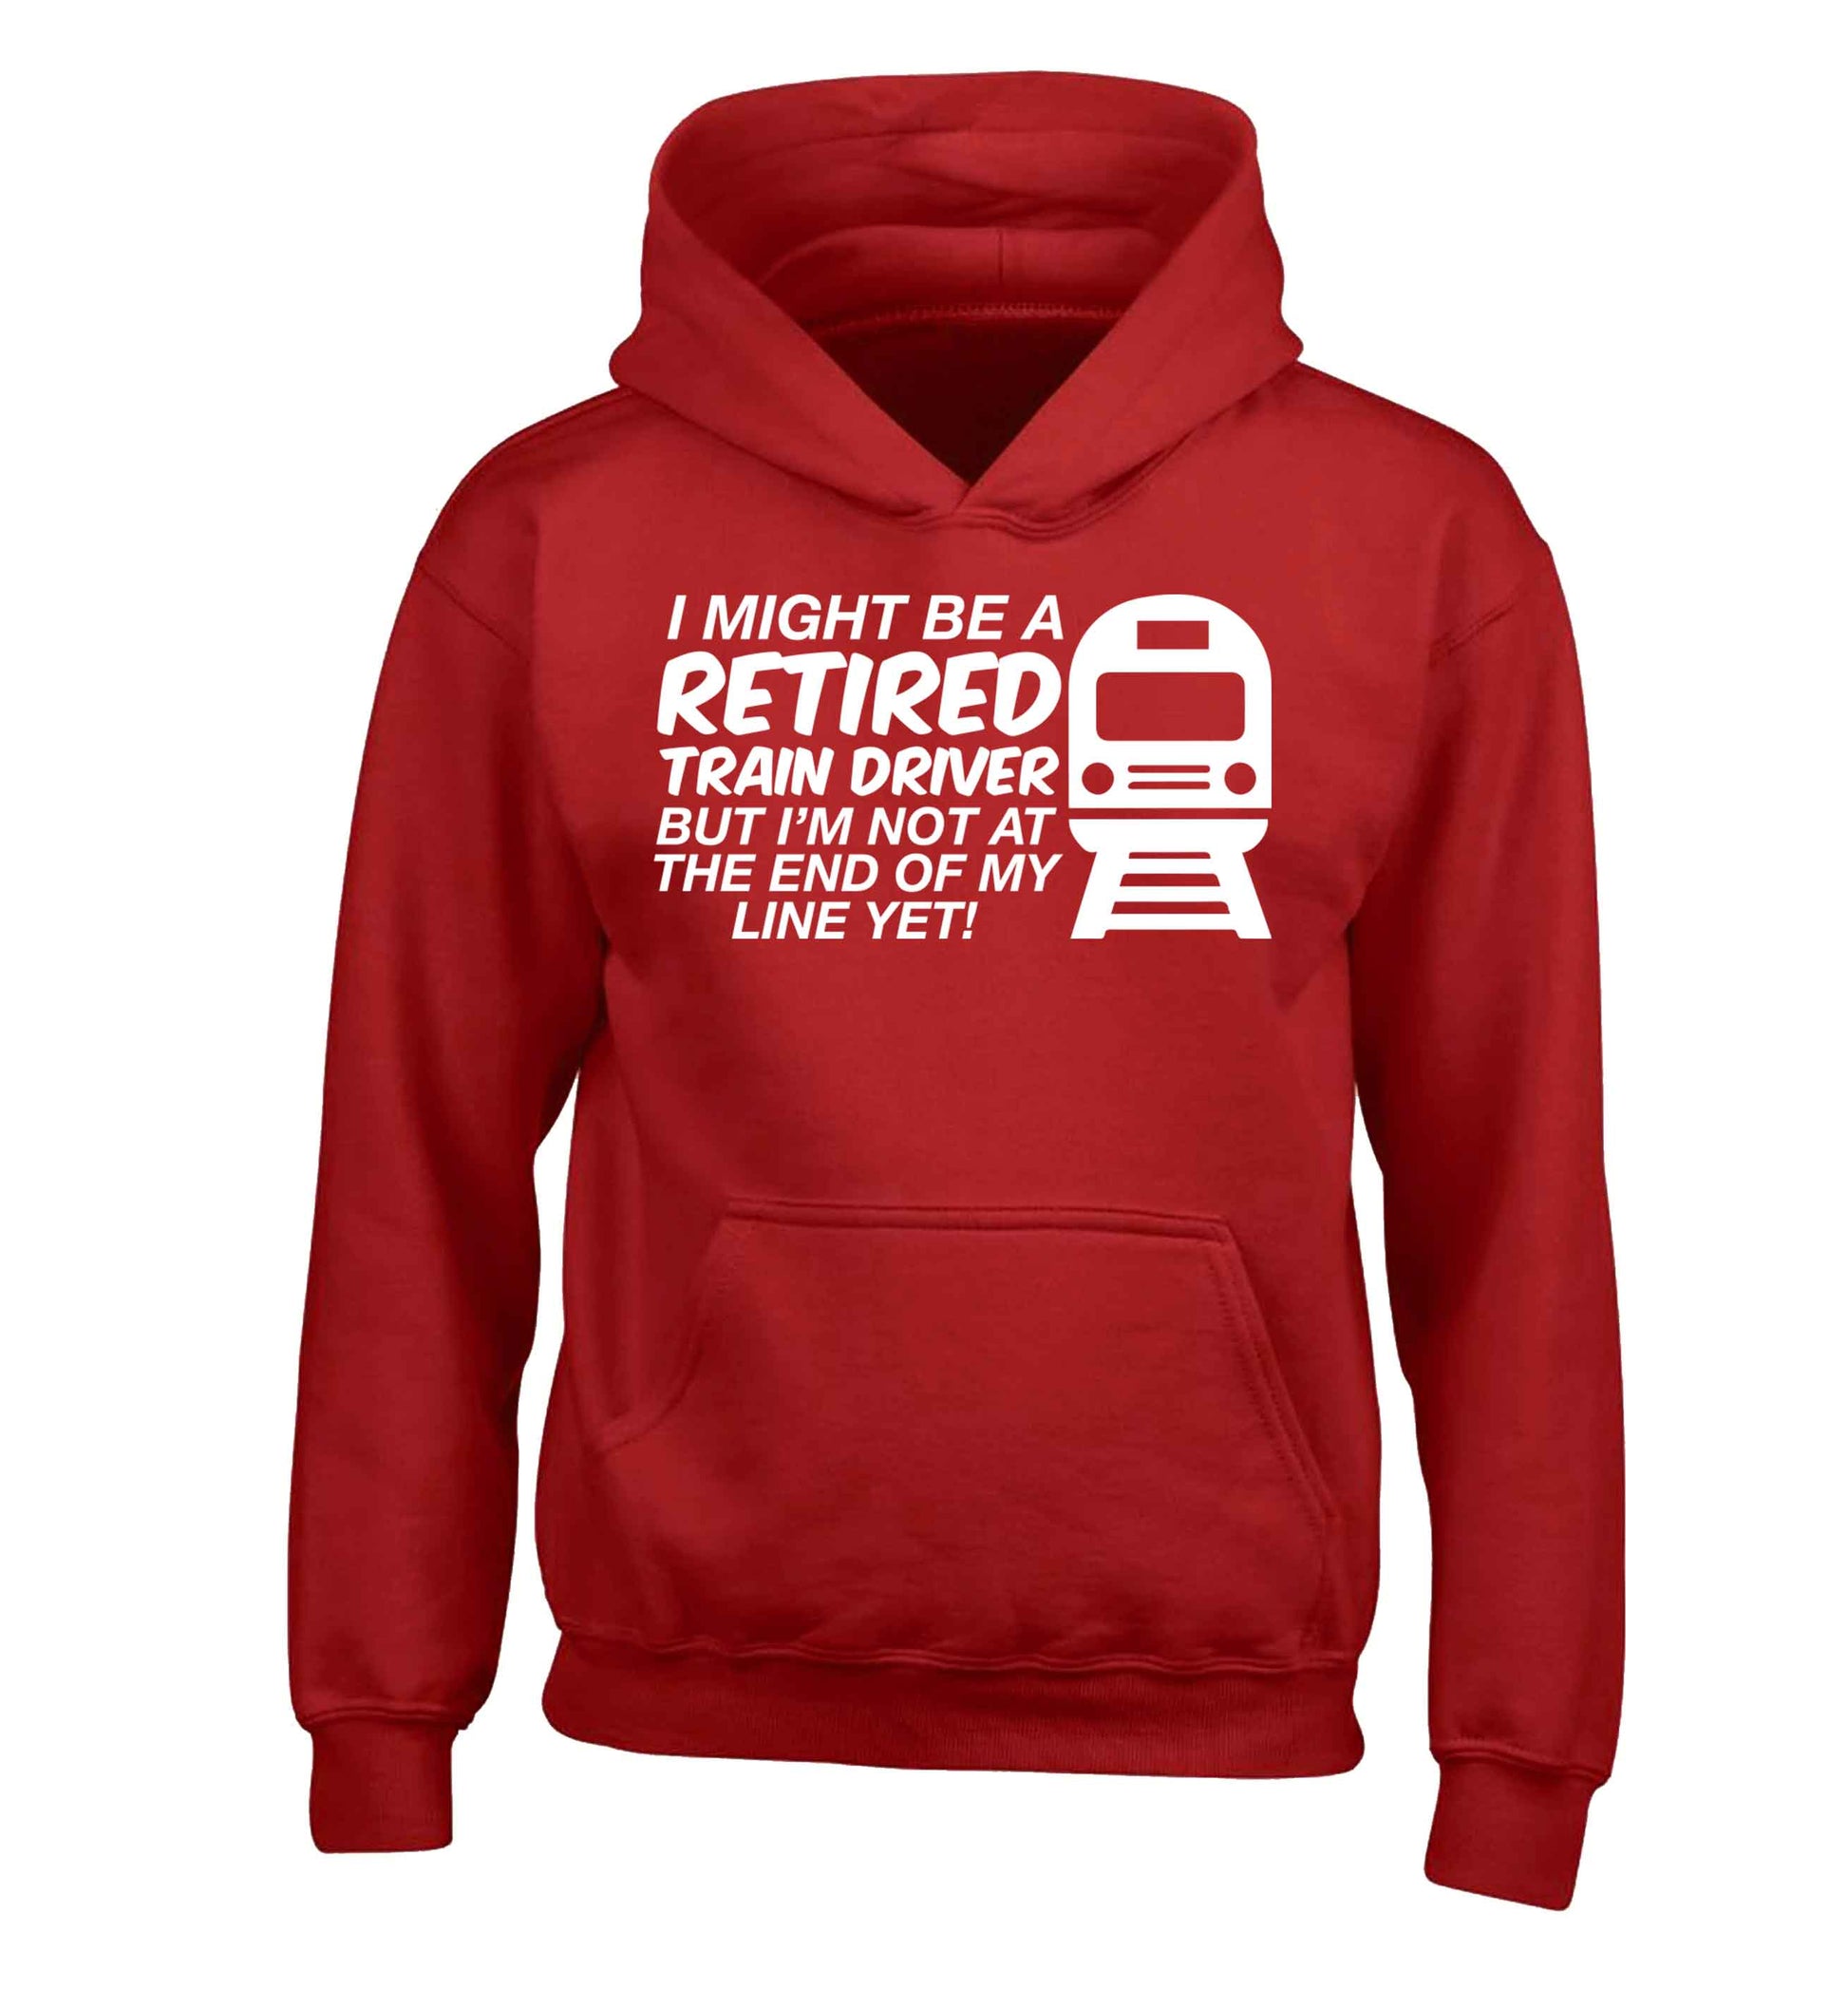 Retired train driver but I'm not at the end of my line yet children's red hoodie 12-13 Years